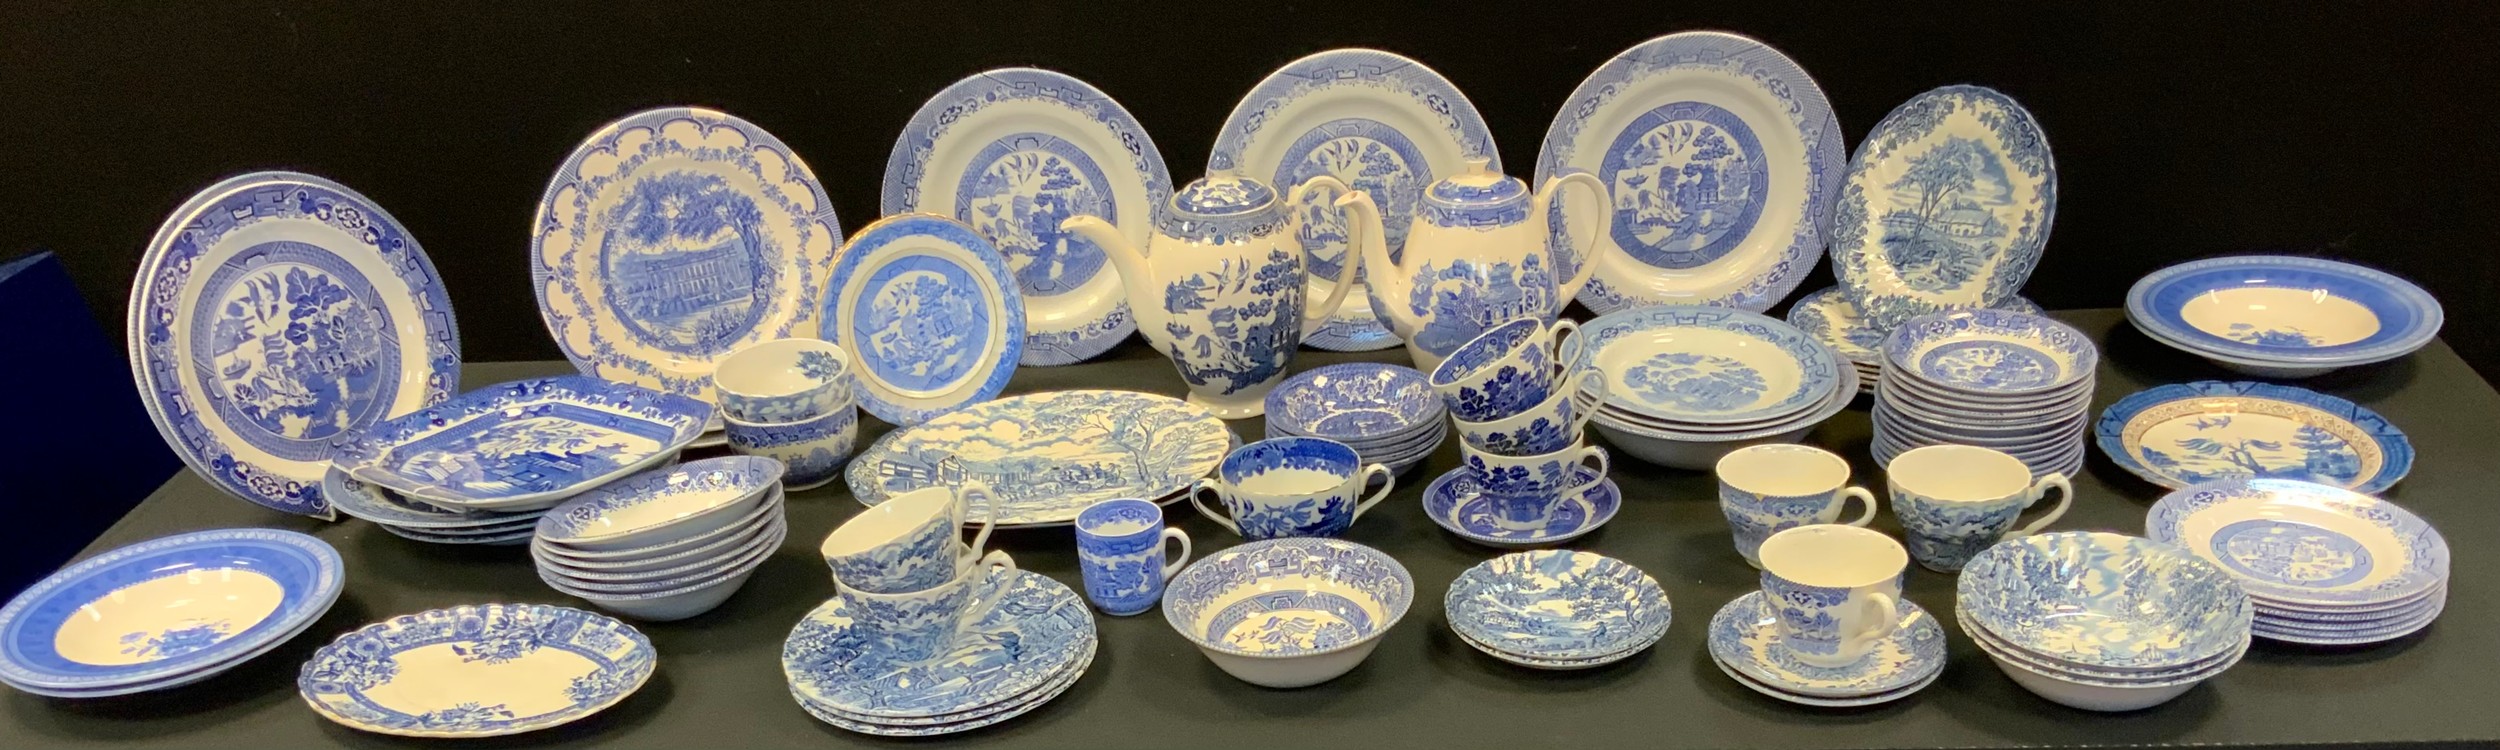 Blue and White - Willow pattern tea and dinner ware; Churchill Out of the Blue bowls; etc